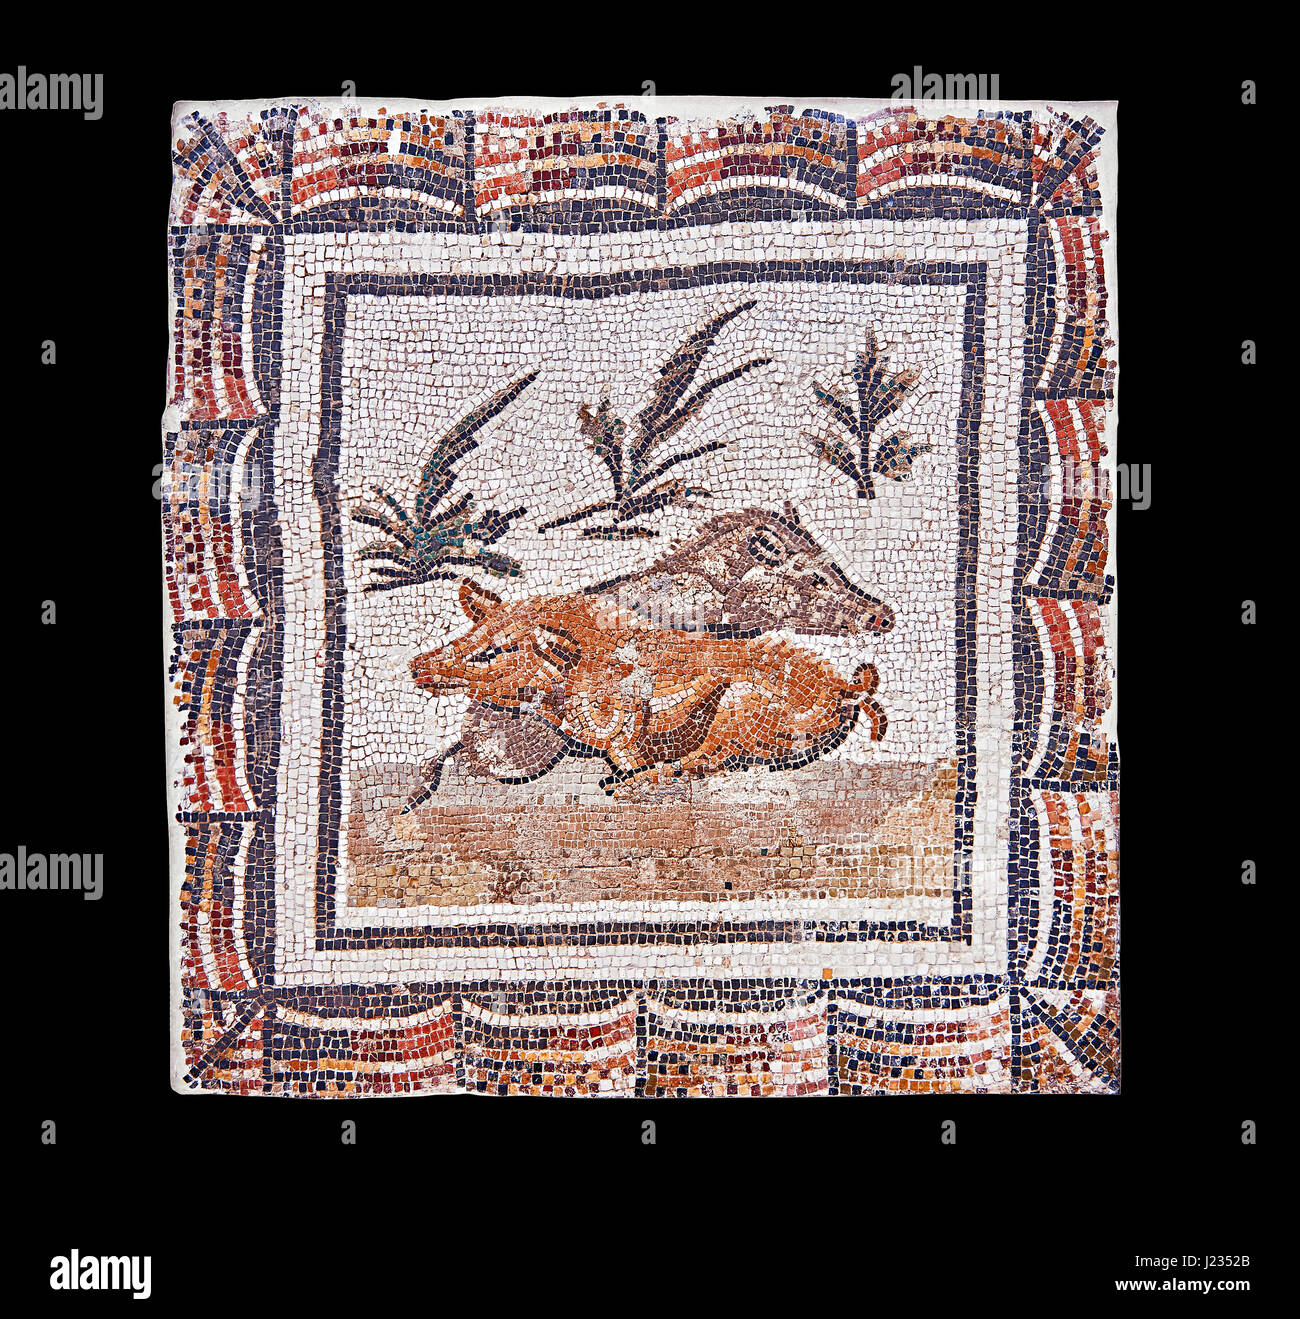 3rd century Roman mosaic panel of a boar and a sow lying down. From Thysdrus (El Jem), Tunisia.  The Bardo Museum, Tunis, Tunisia. Black background Stock Photo